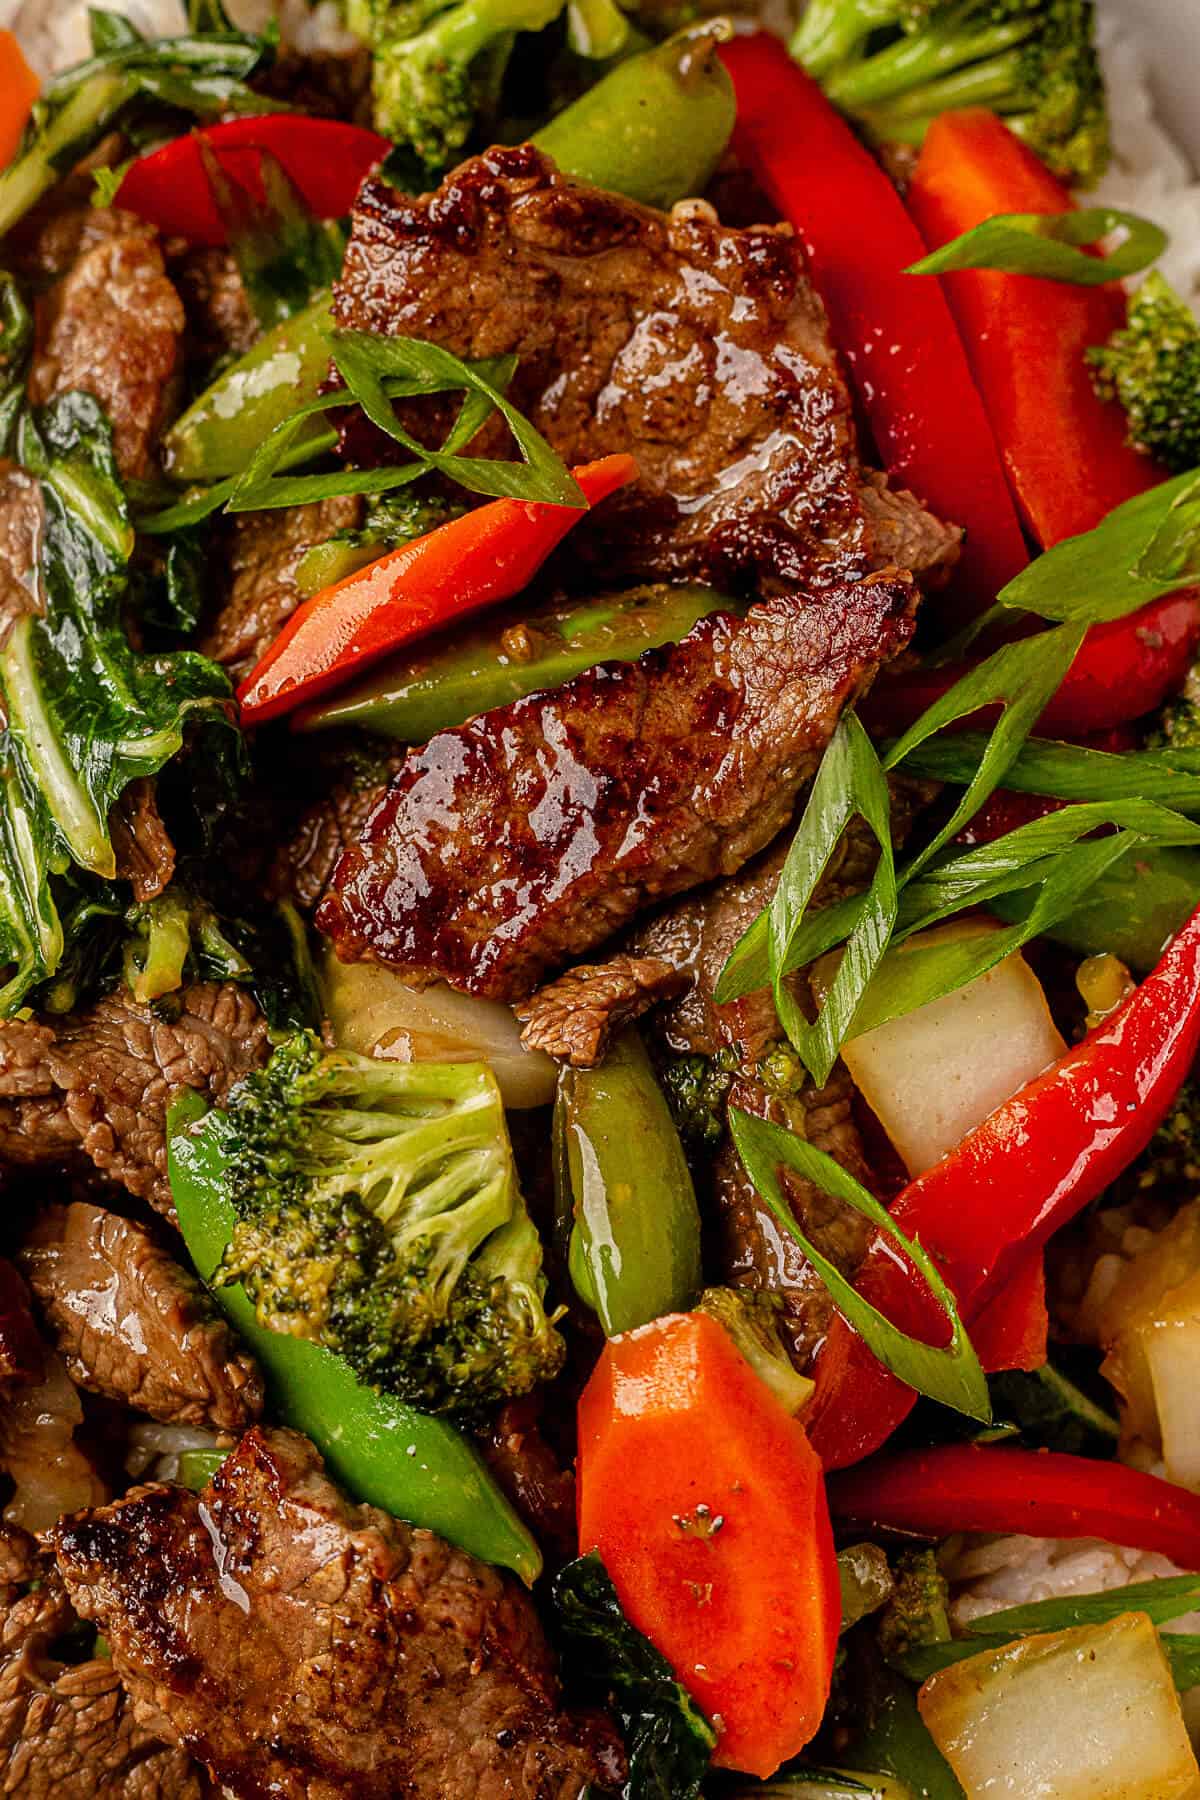 flank steak, broccoli, carrots, bok choy, and red peppers in a homemade stir fry sauce